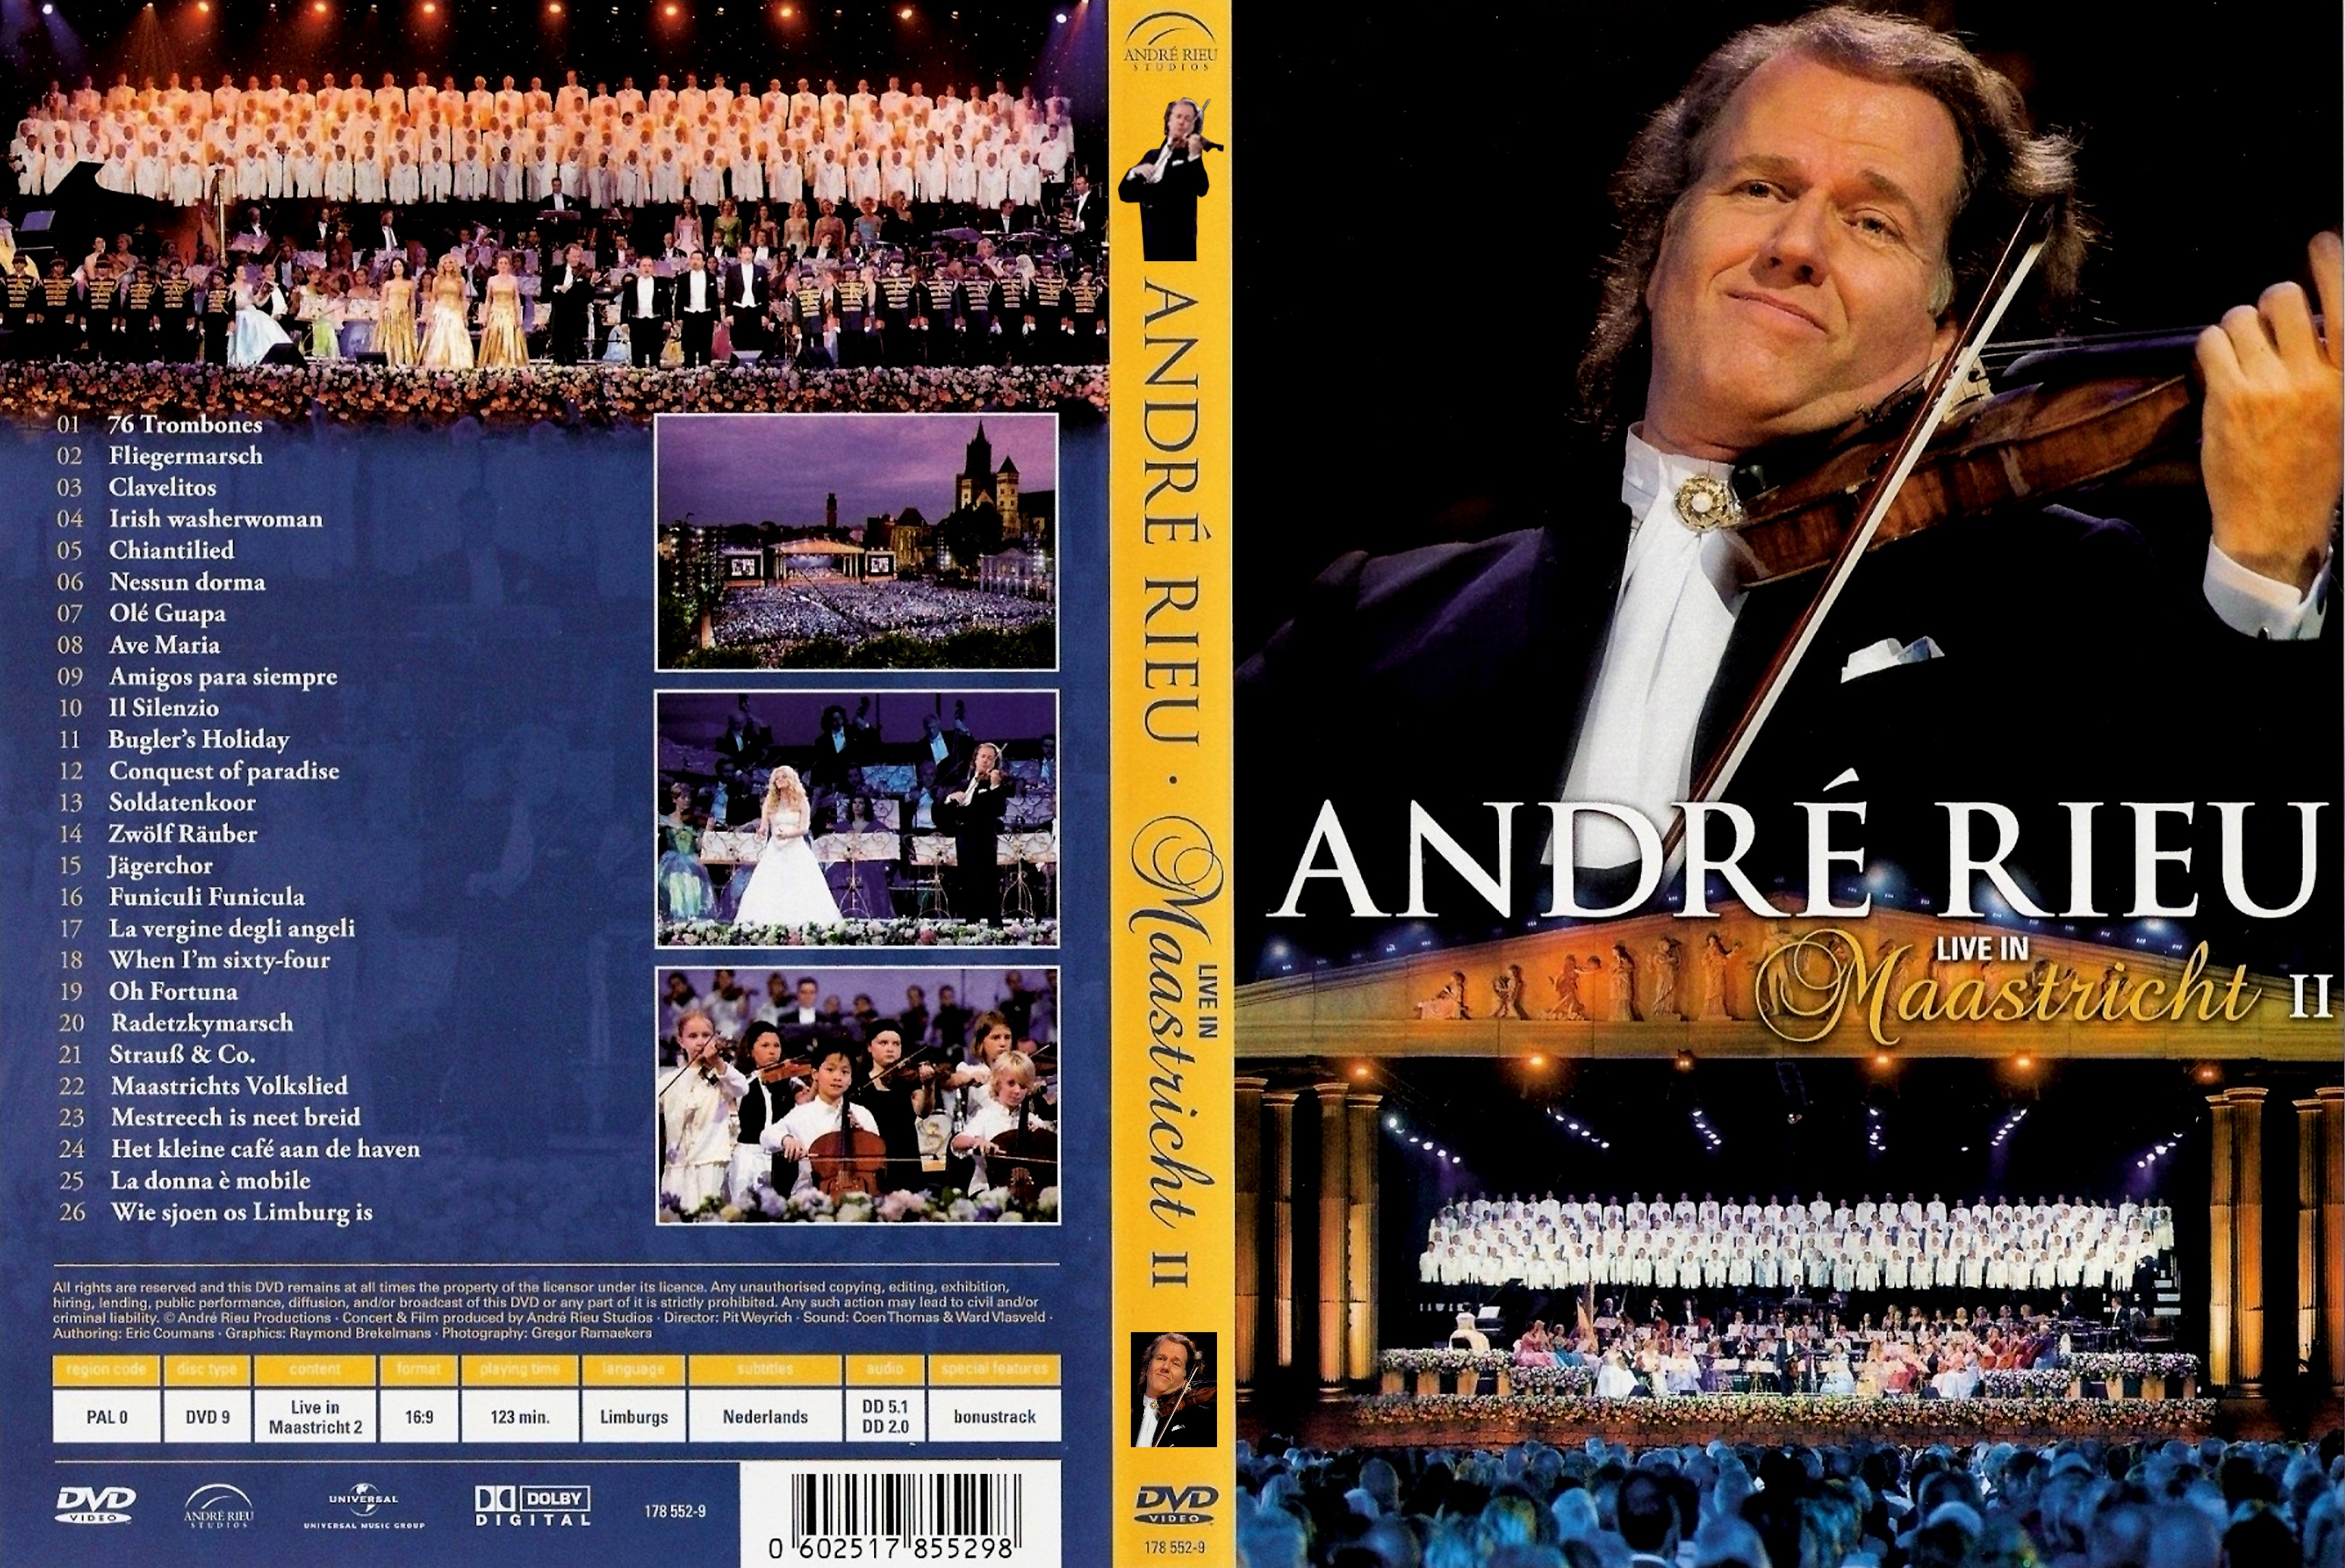 André Rieu - Live in Maastricht 2 (2008). 